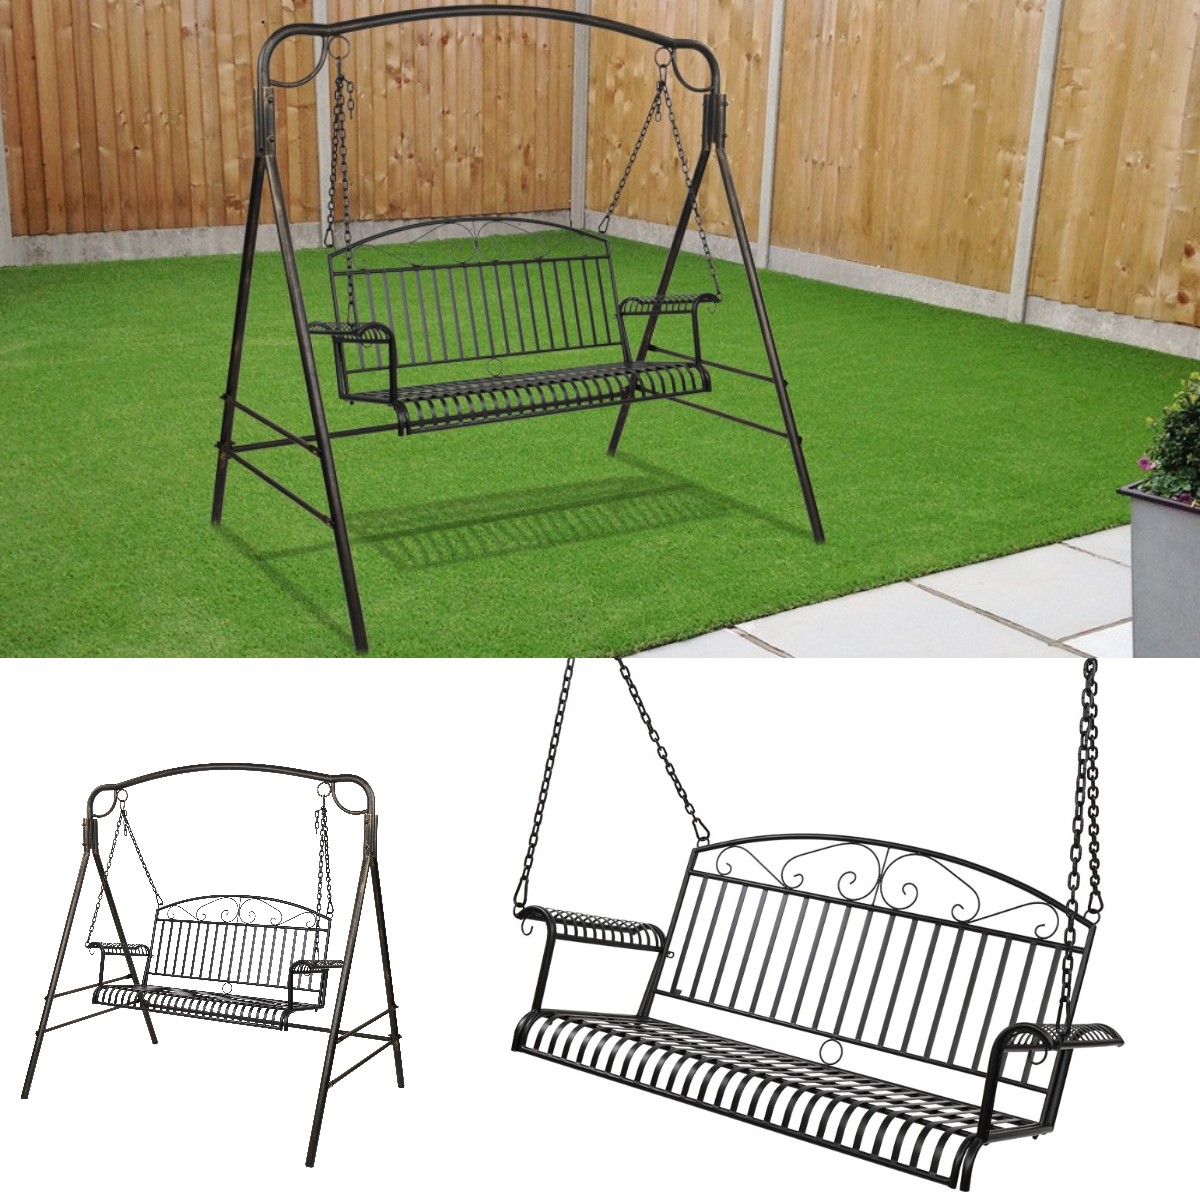 Goorabbit Outdoor Patio Swing Chair,Metal Porch Swing, Metal Outdoor Hanging Porch Swing, Iron Patio Porch Swing Bench Chairs for Patio Garden Backyard,Black54.53x 17.72 x23.23"(Without Stand) - image 1 of 15